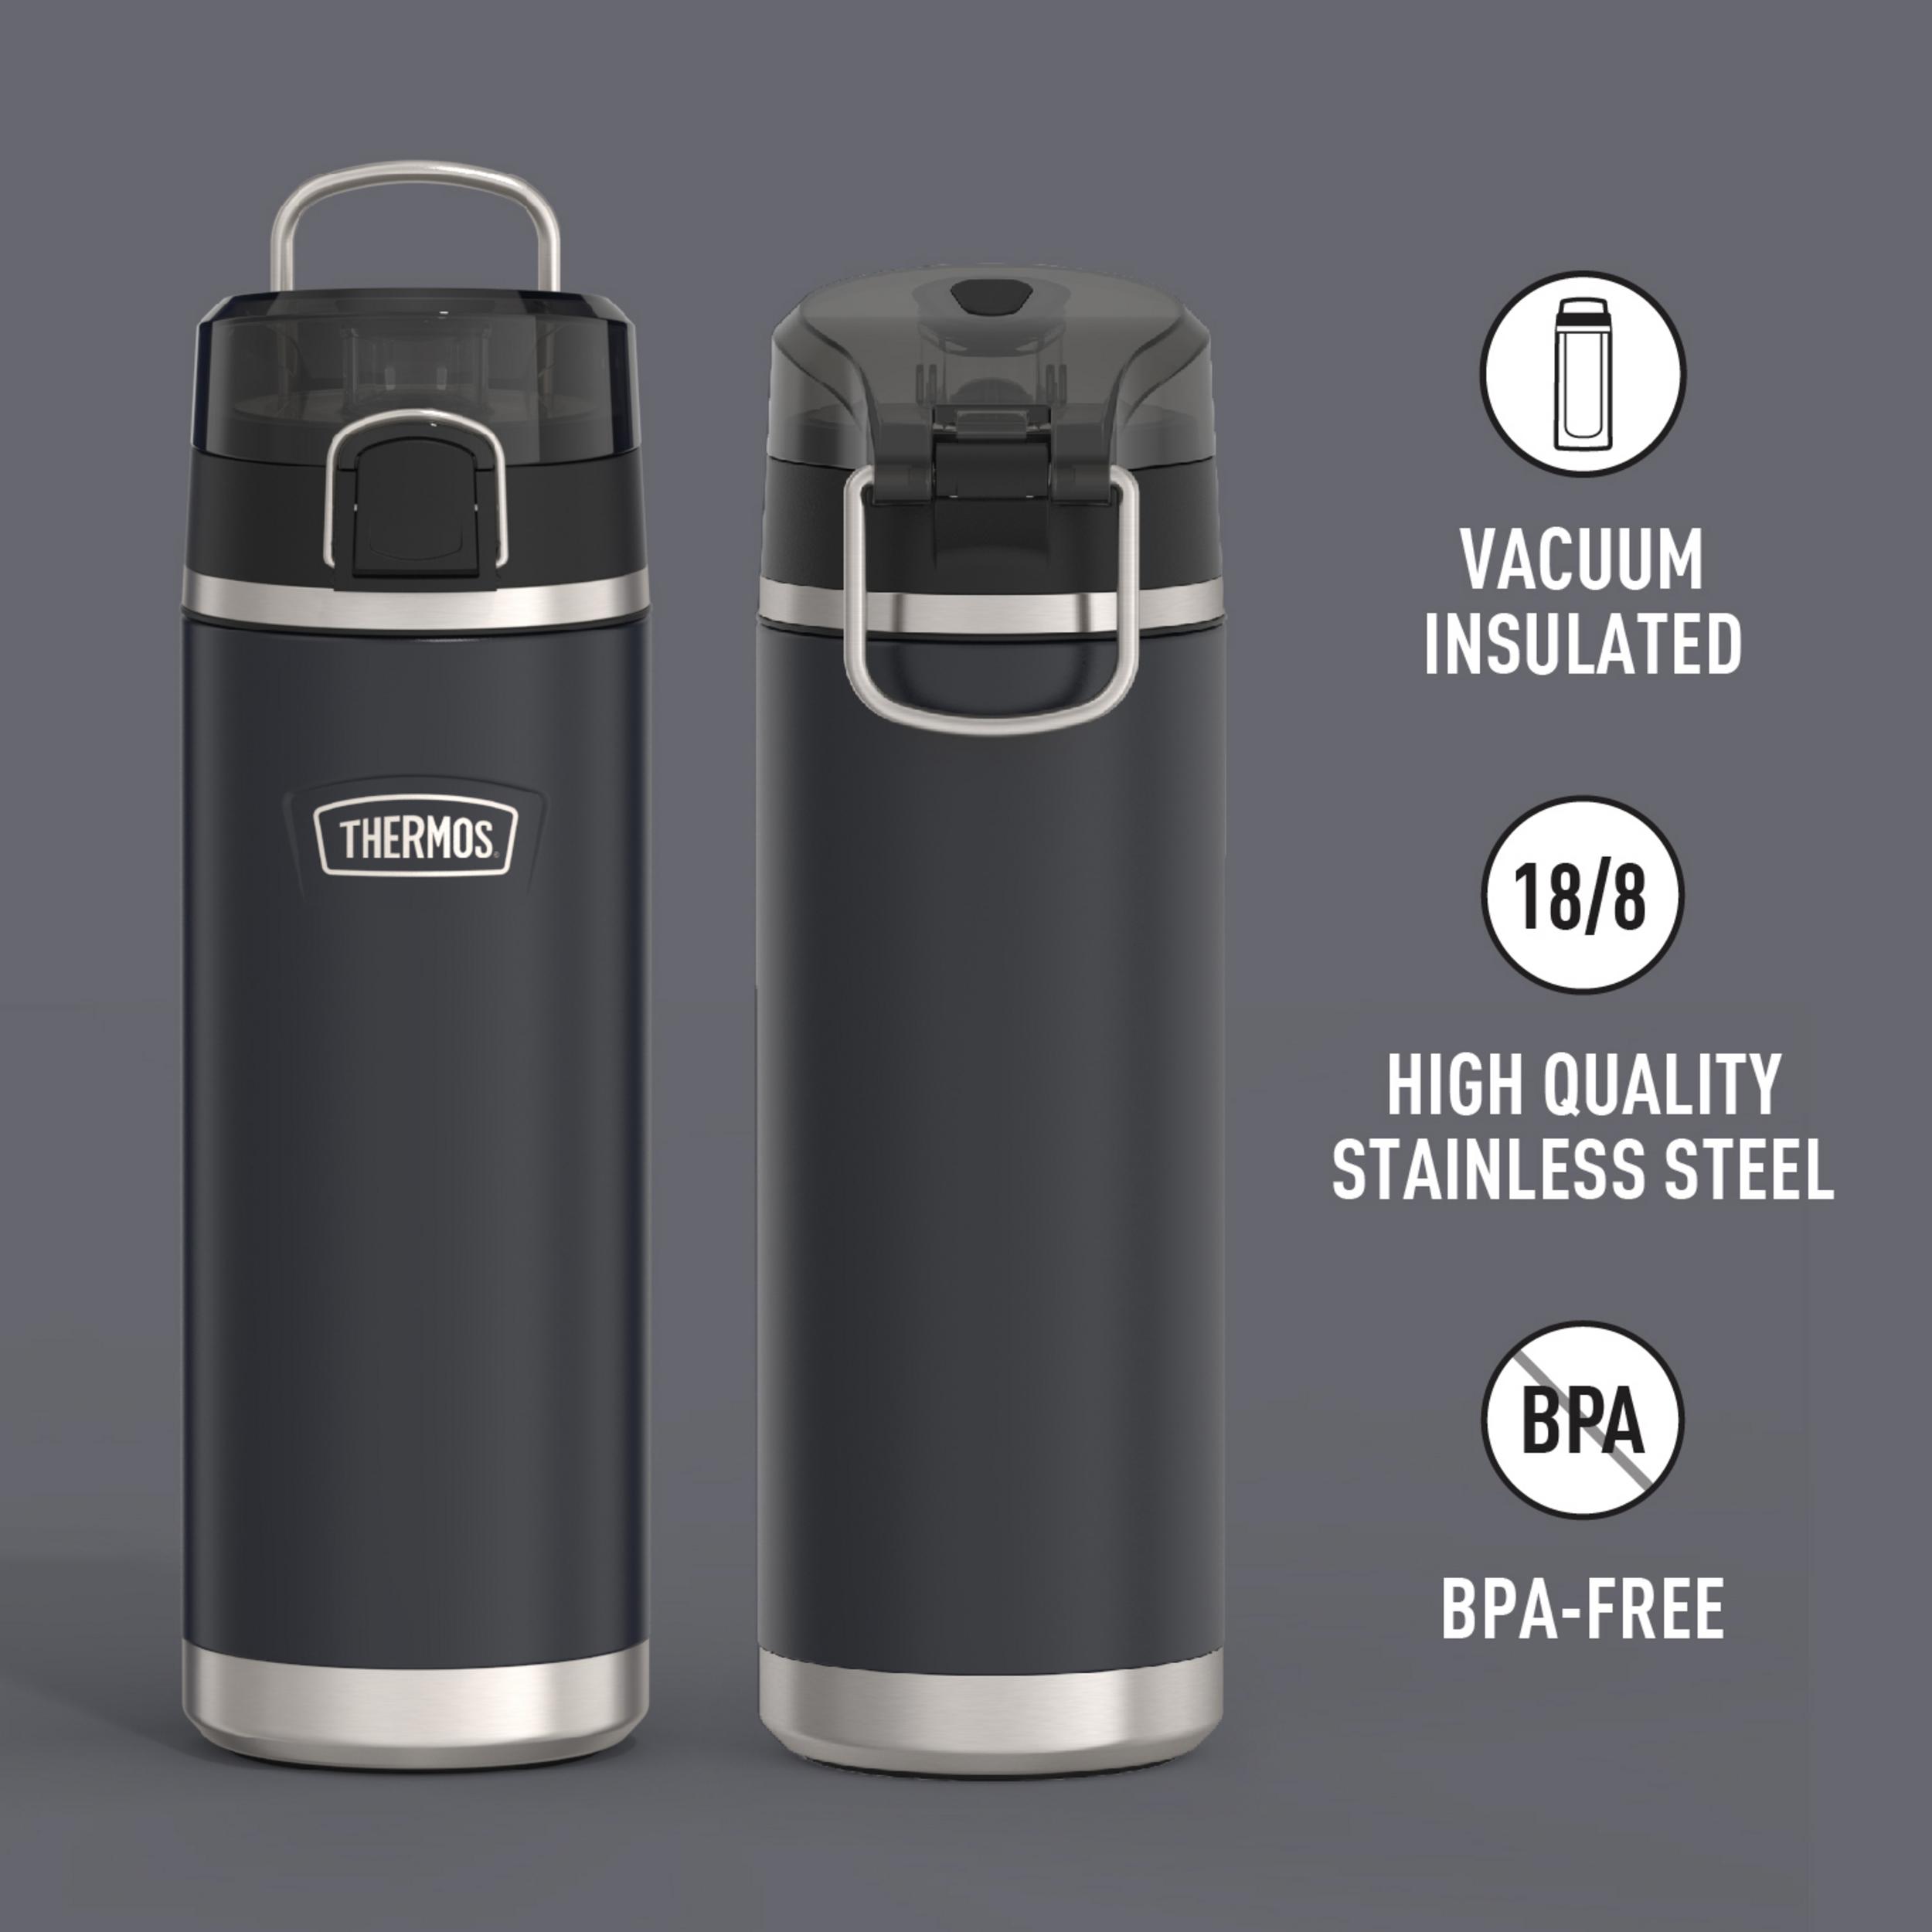 Thermos ICON Series Stainless Steel Vacuum Insulated Water Bottle w/ Spout, Granite, 24oz - image 3 of 13